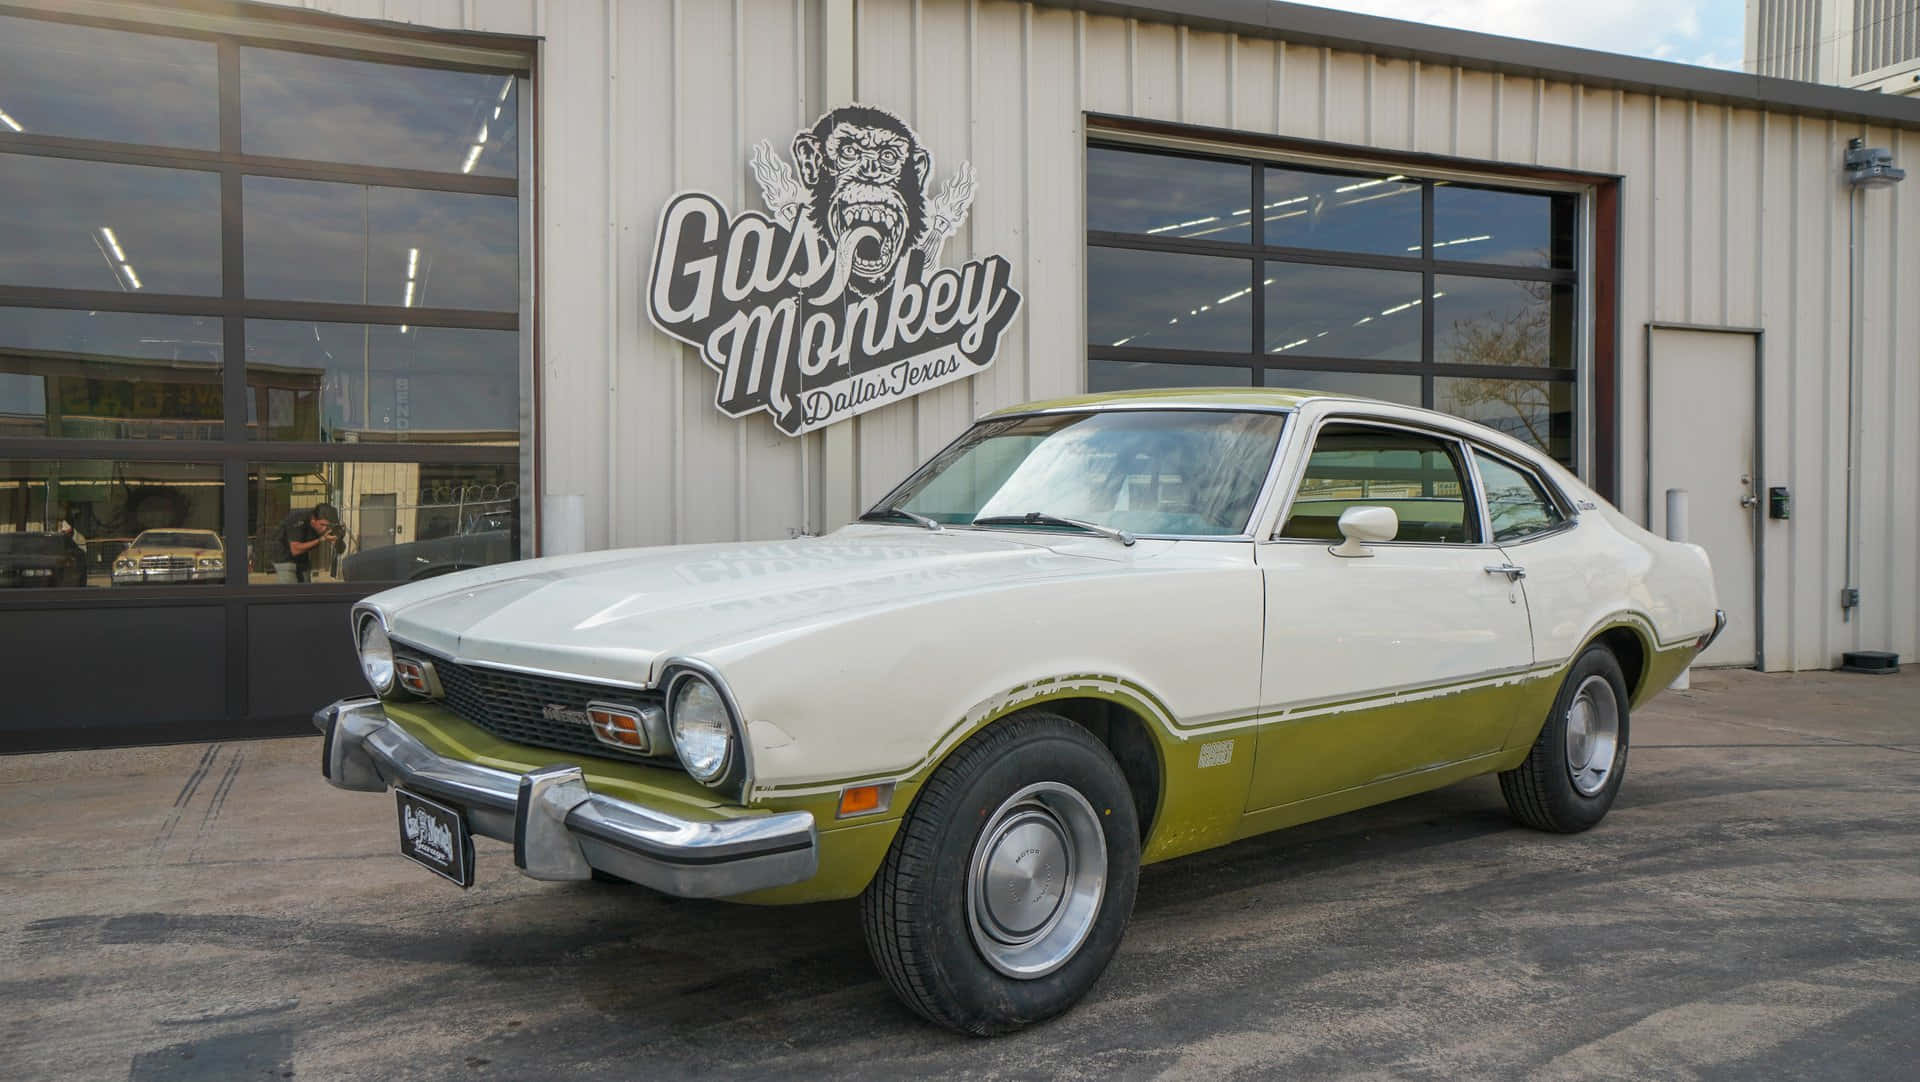 "Welcome to the new era of driving: The Ford Maverick"